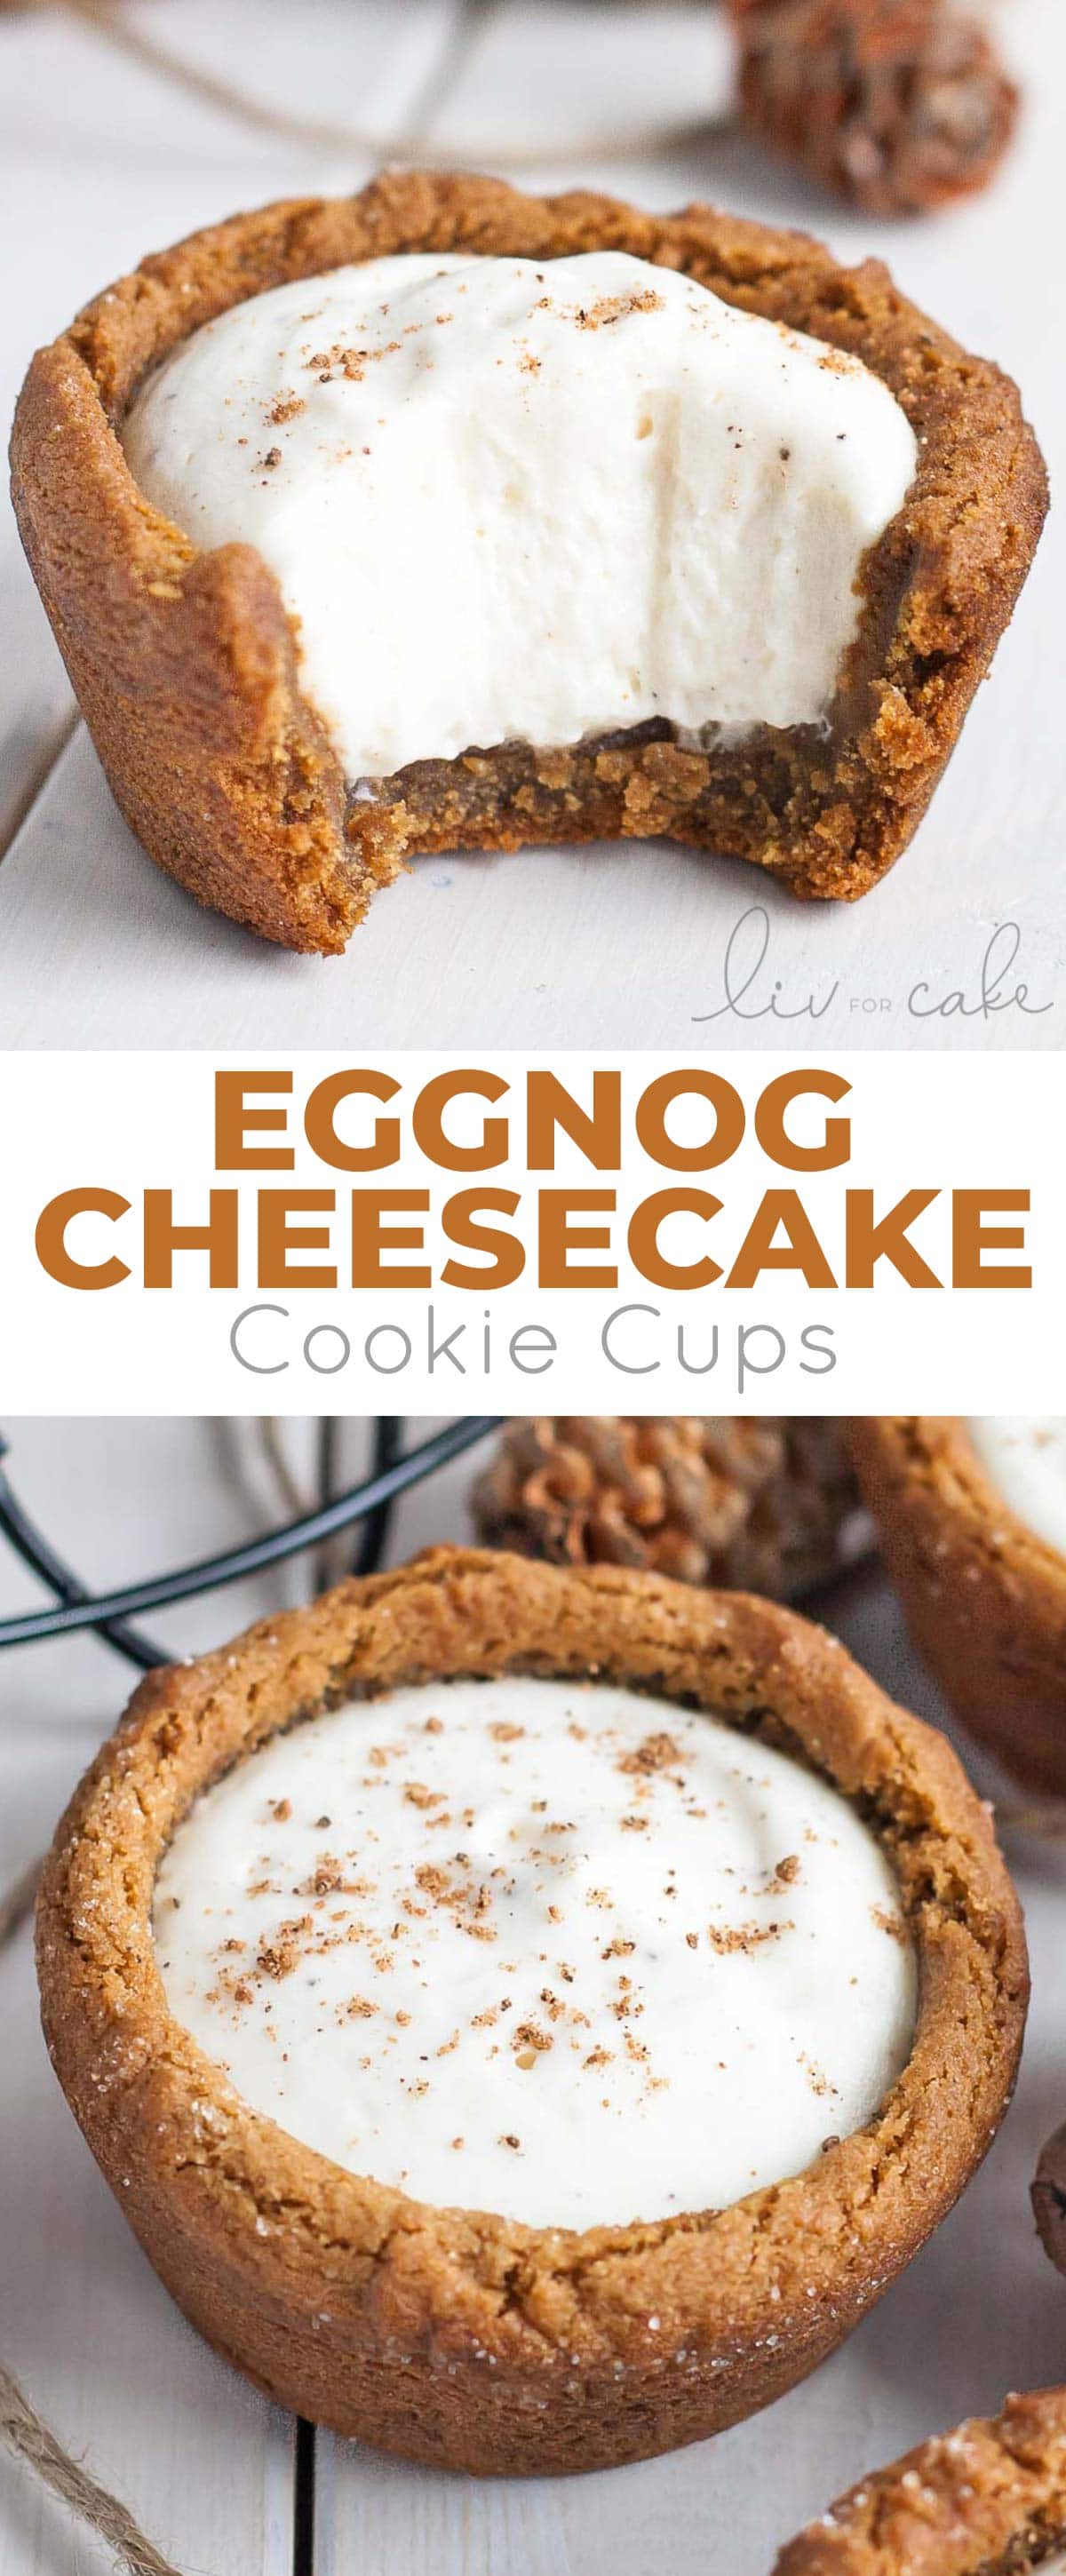 Eggnog Cheesecake Cookie Cups photo collage